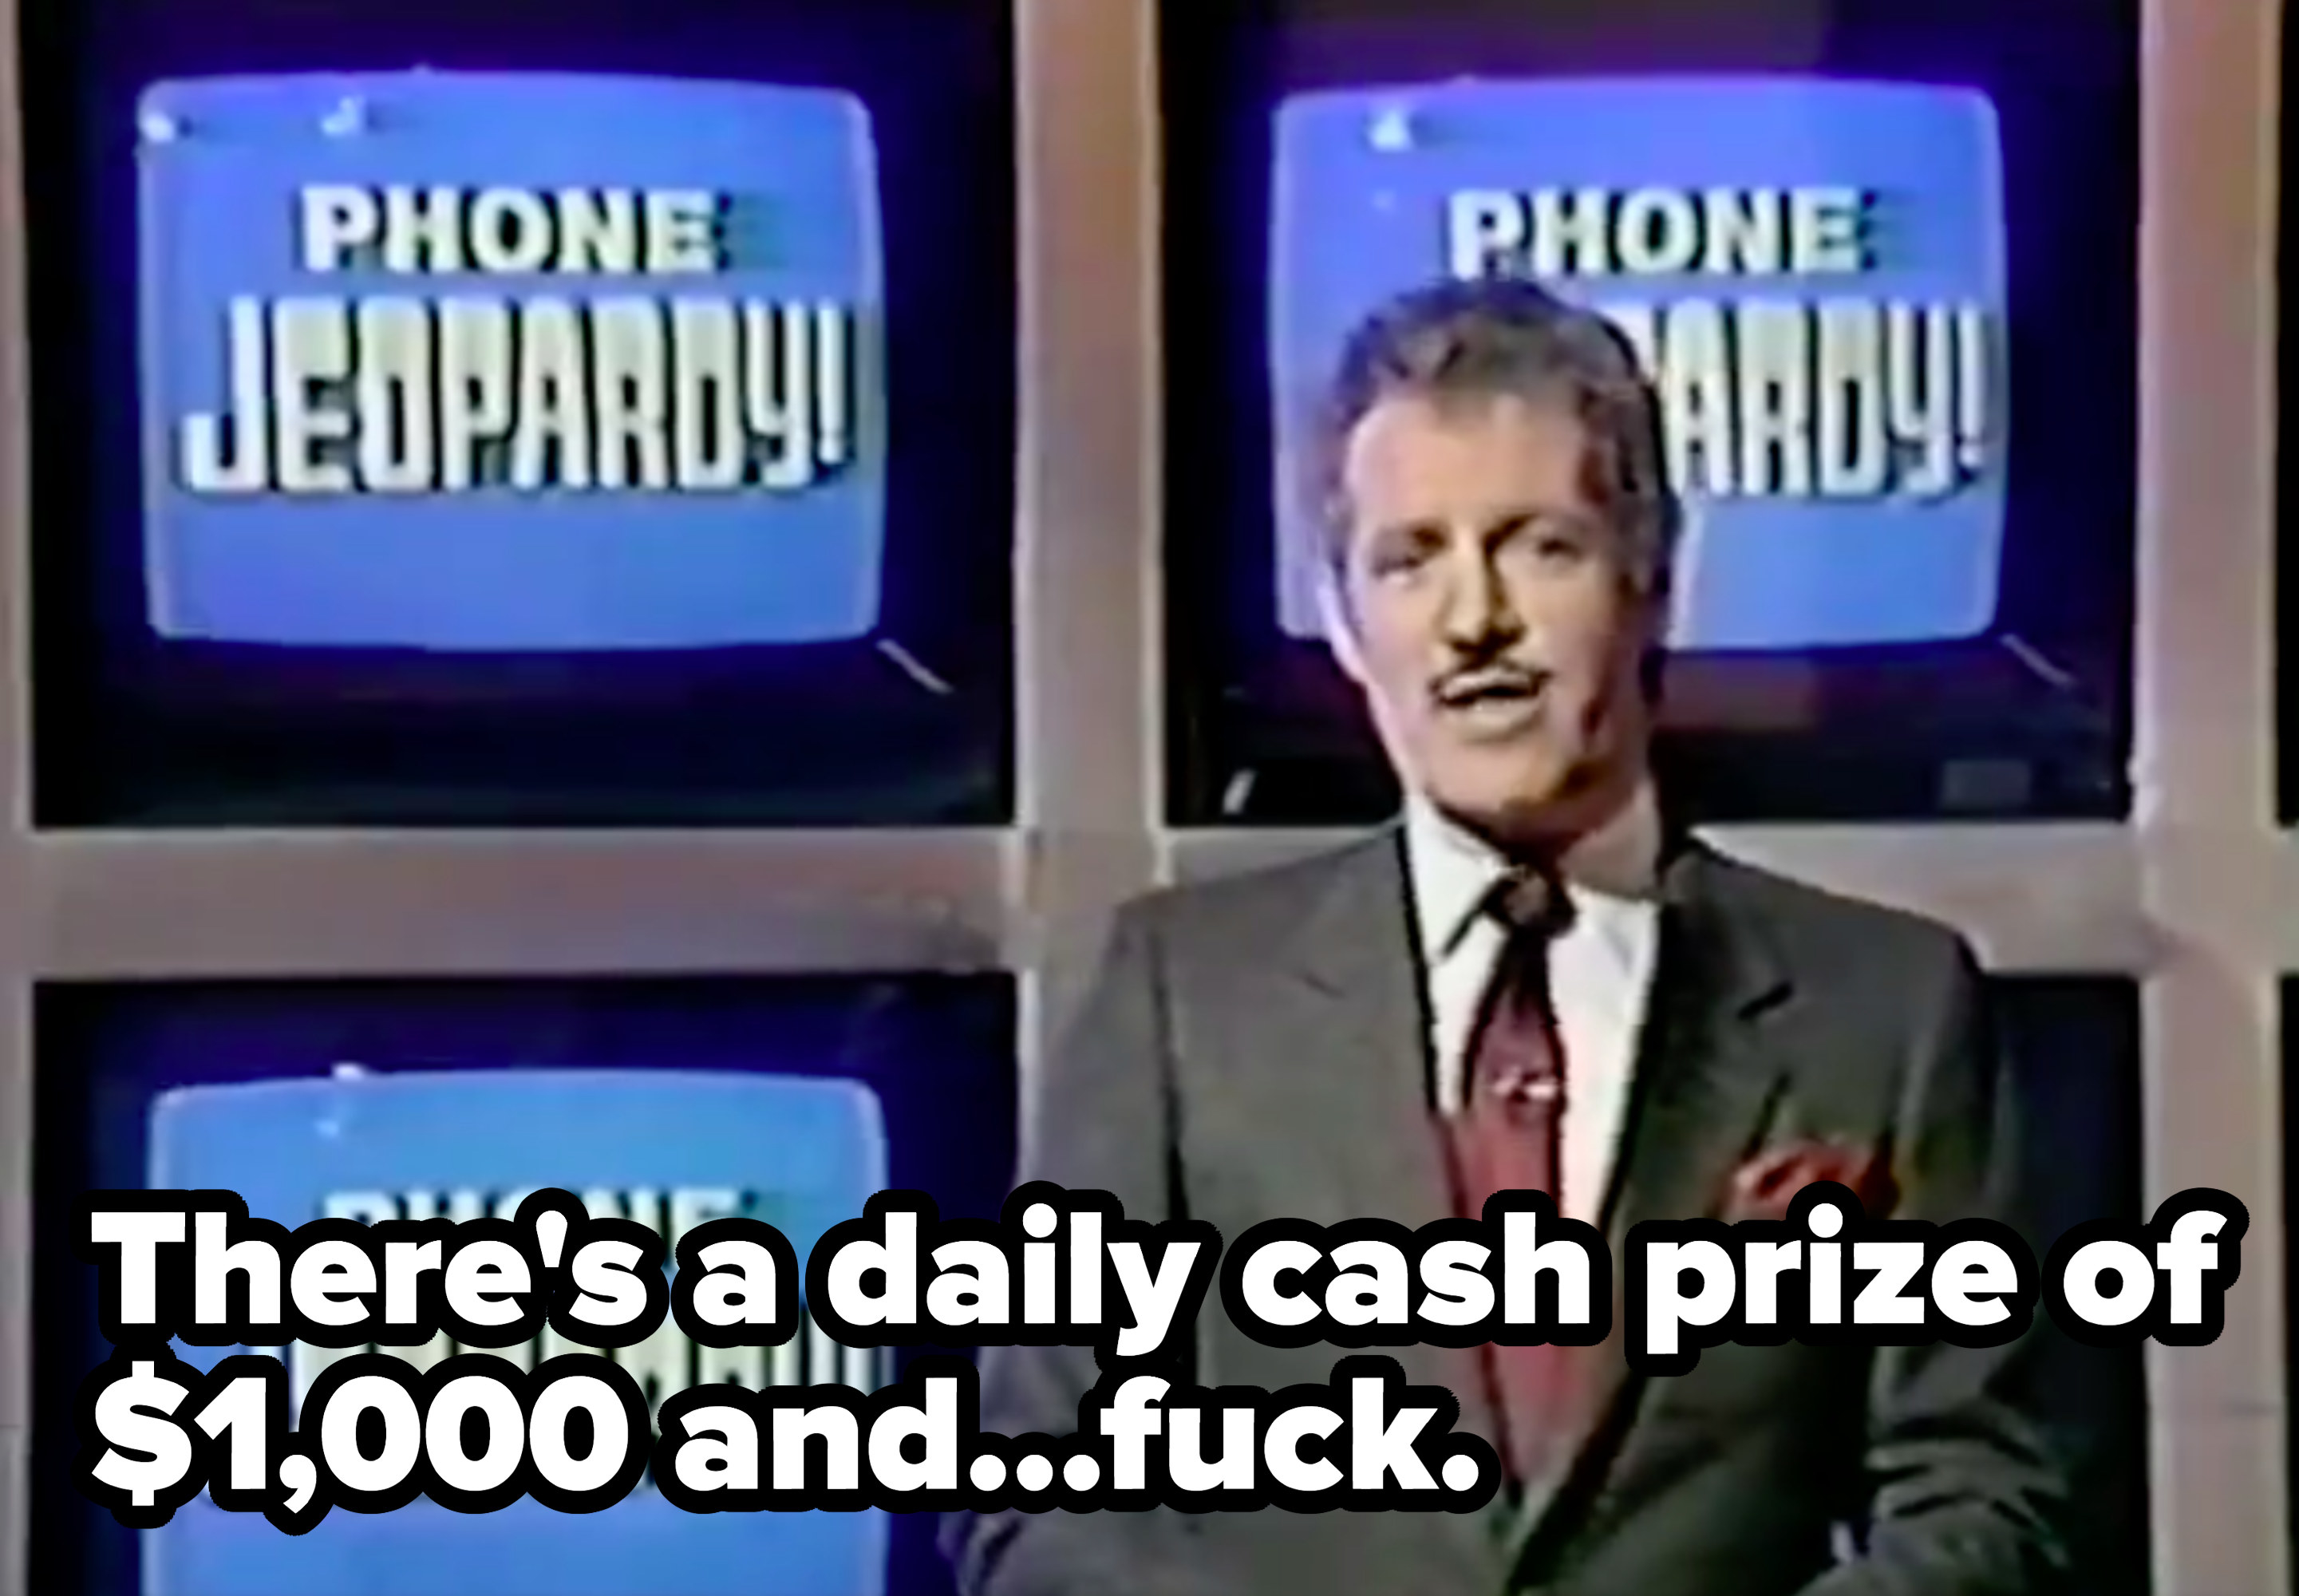 Alex says, &quot;There&#x27;s a daily cash prize of $1,000 and...fuck&quot;